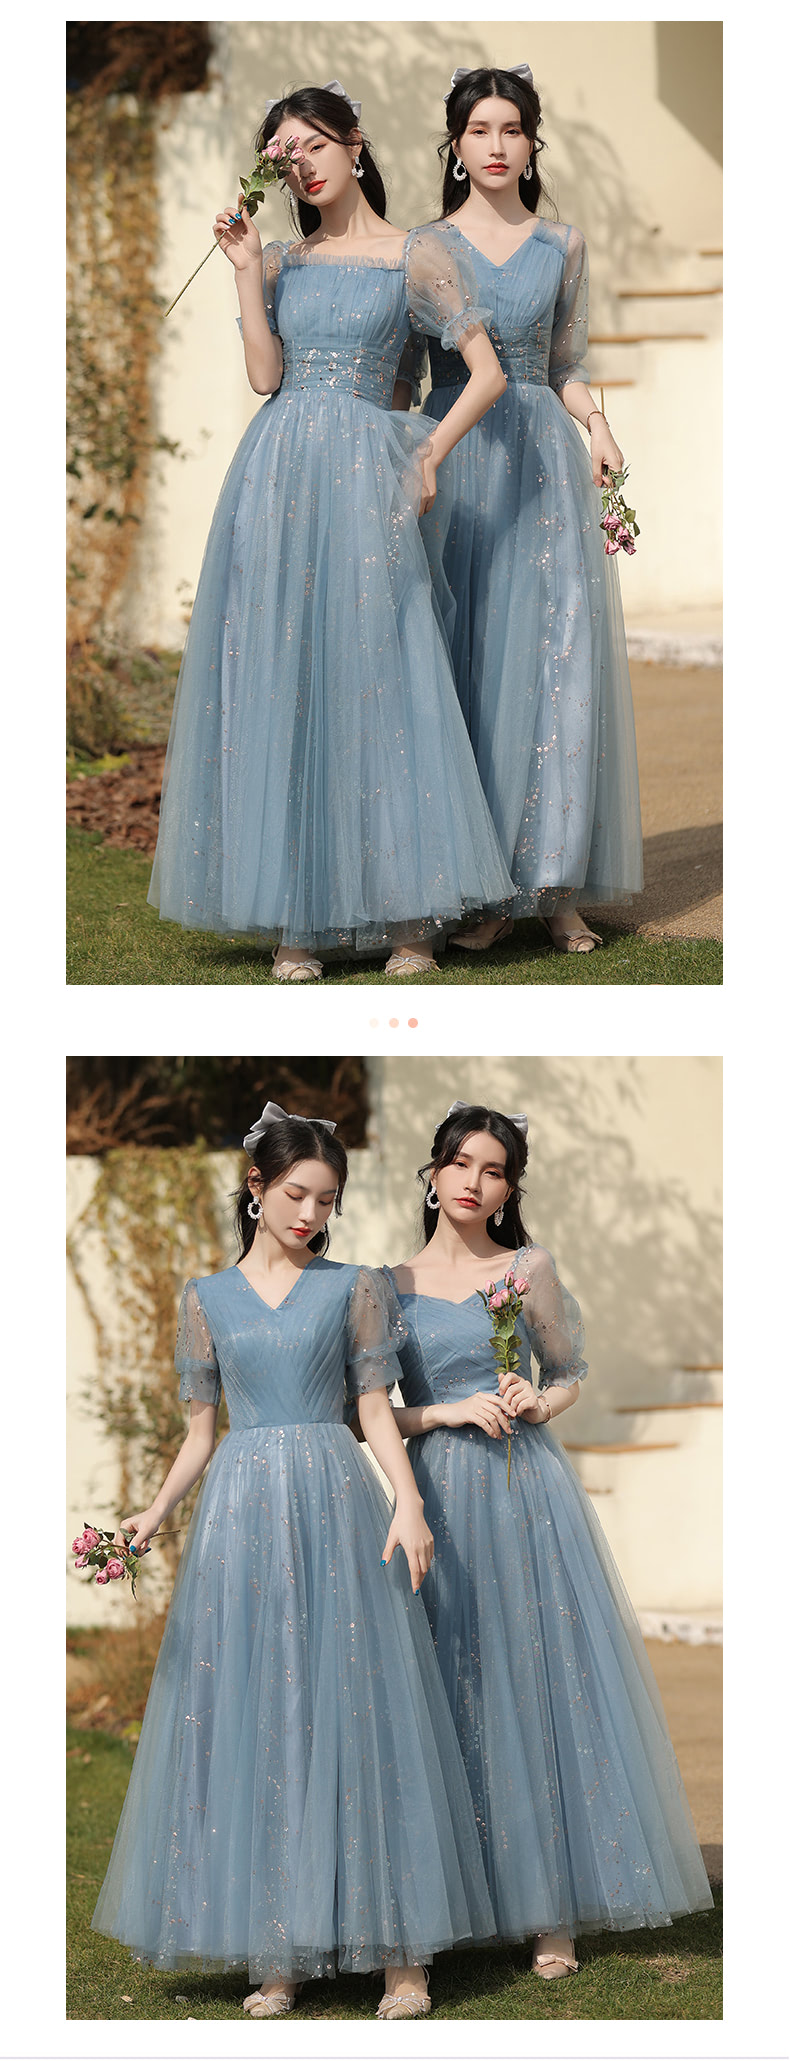 Blue-Bridesmaid-Dress-Wedding-Female-Guest-Gown-with-4-Styles13.jpg